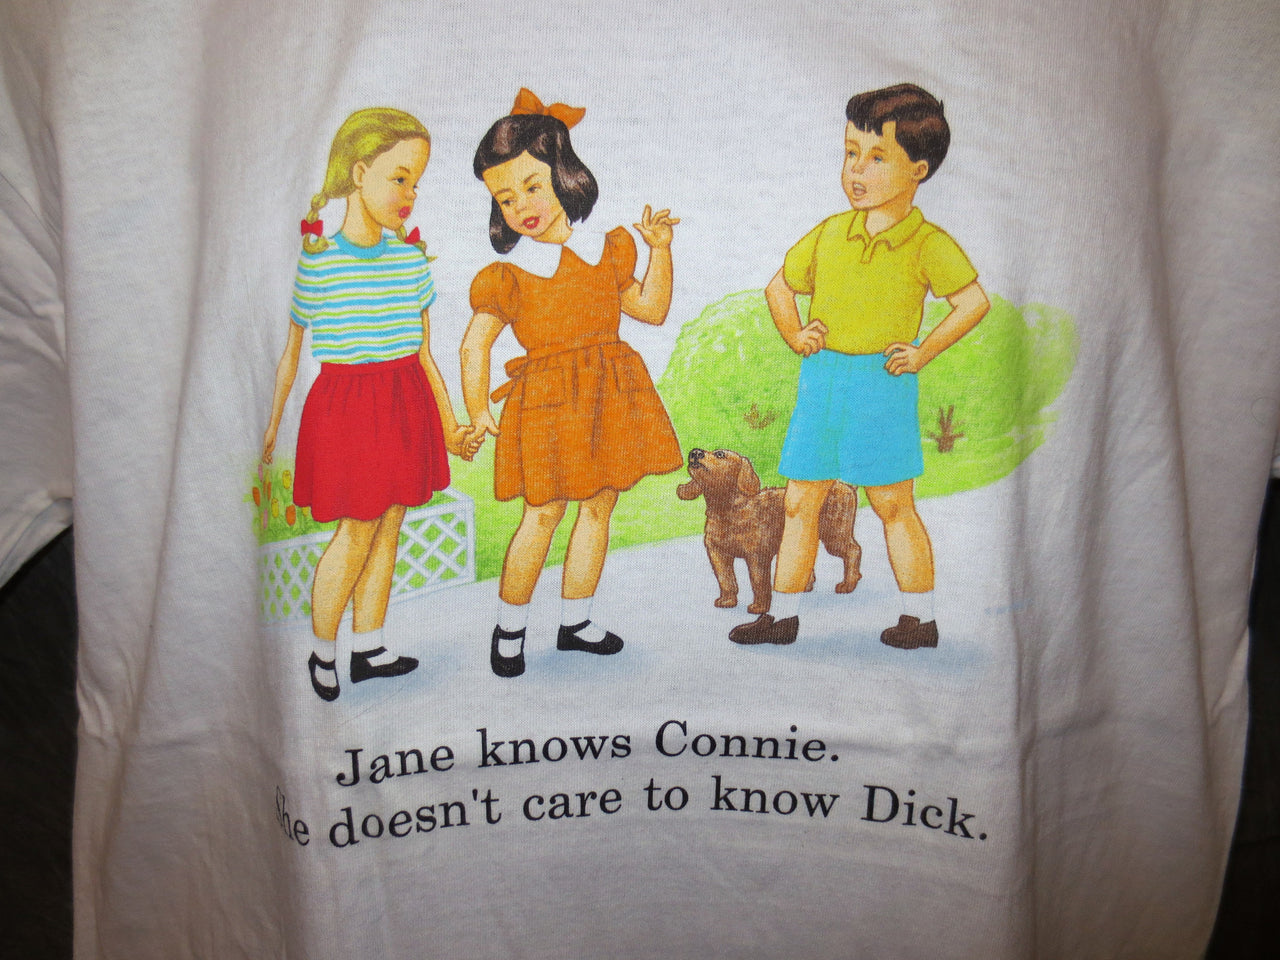 Childhood Jane Knows Connie She Doesn't Care to Know Dick Tshirt - TshirtNow.net - 4